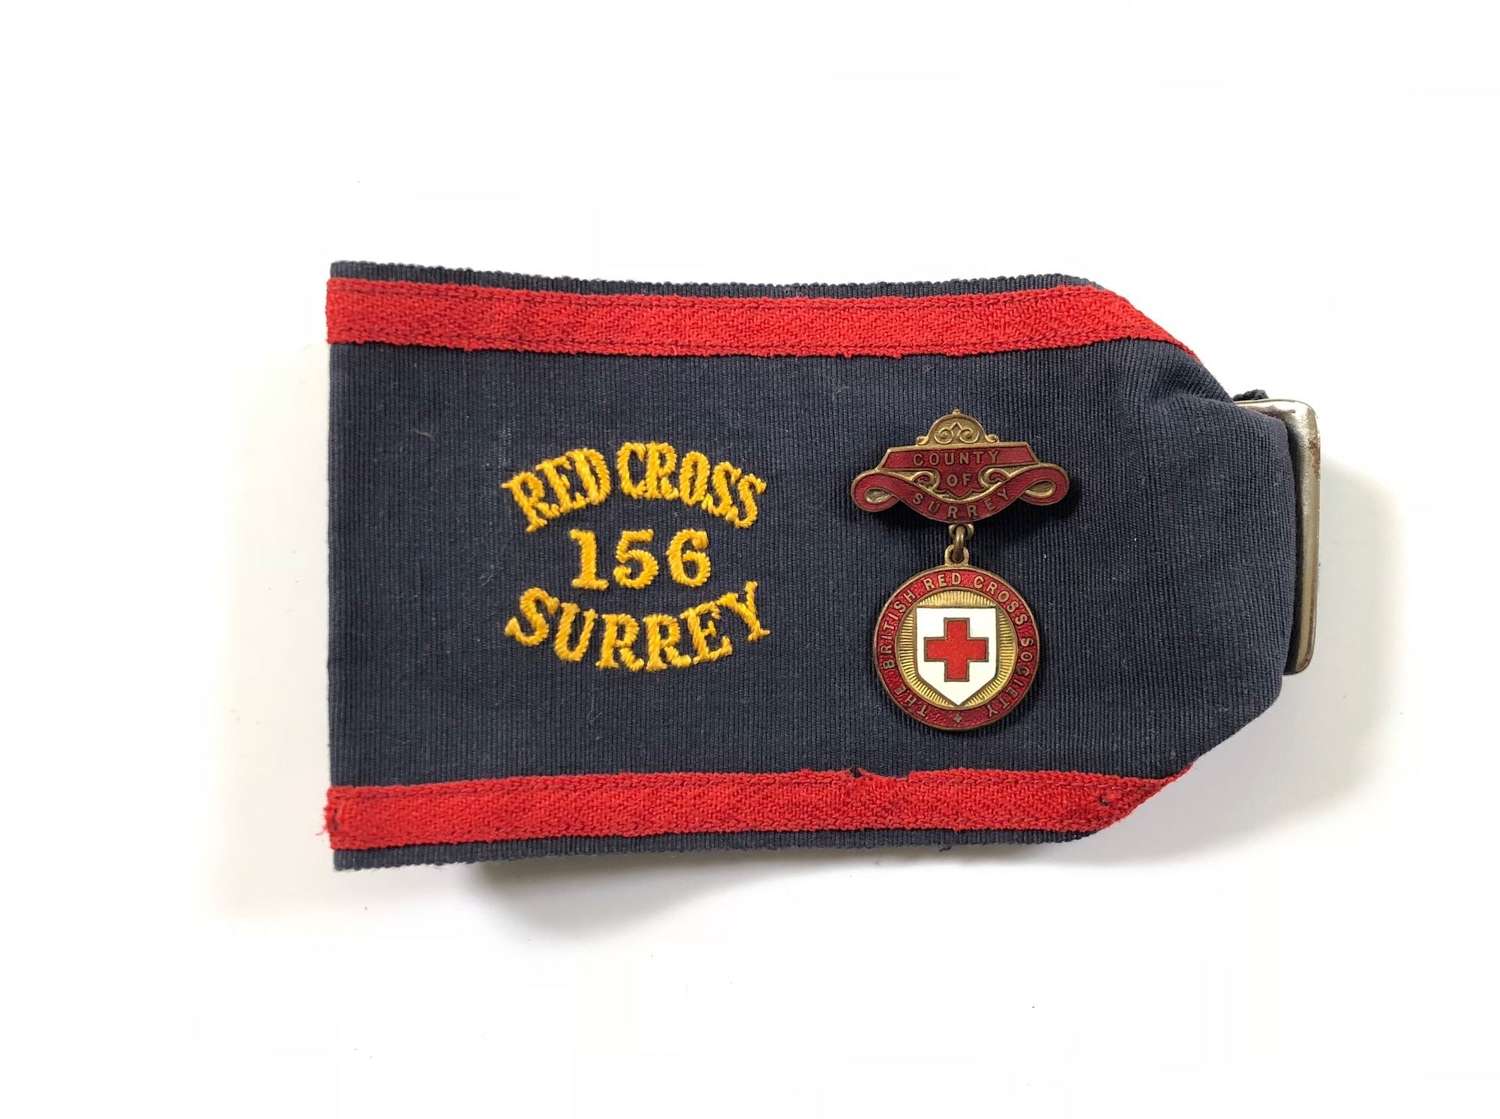 WW2 Period Home Front Red Cross Surrey Armband & Medal.